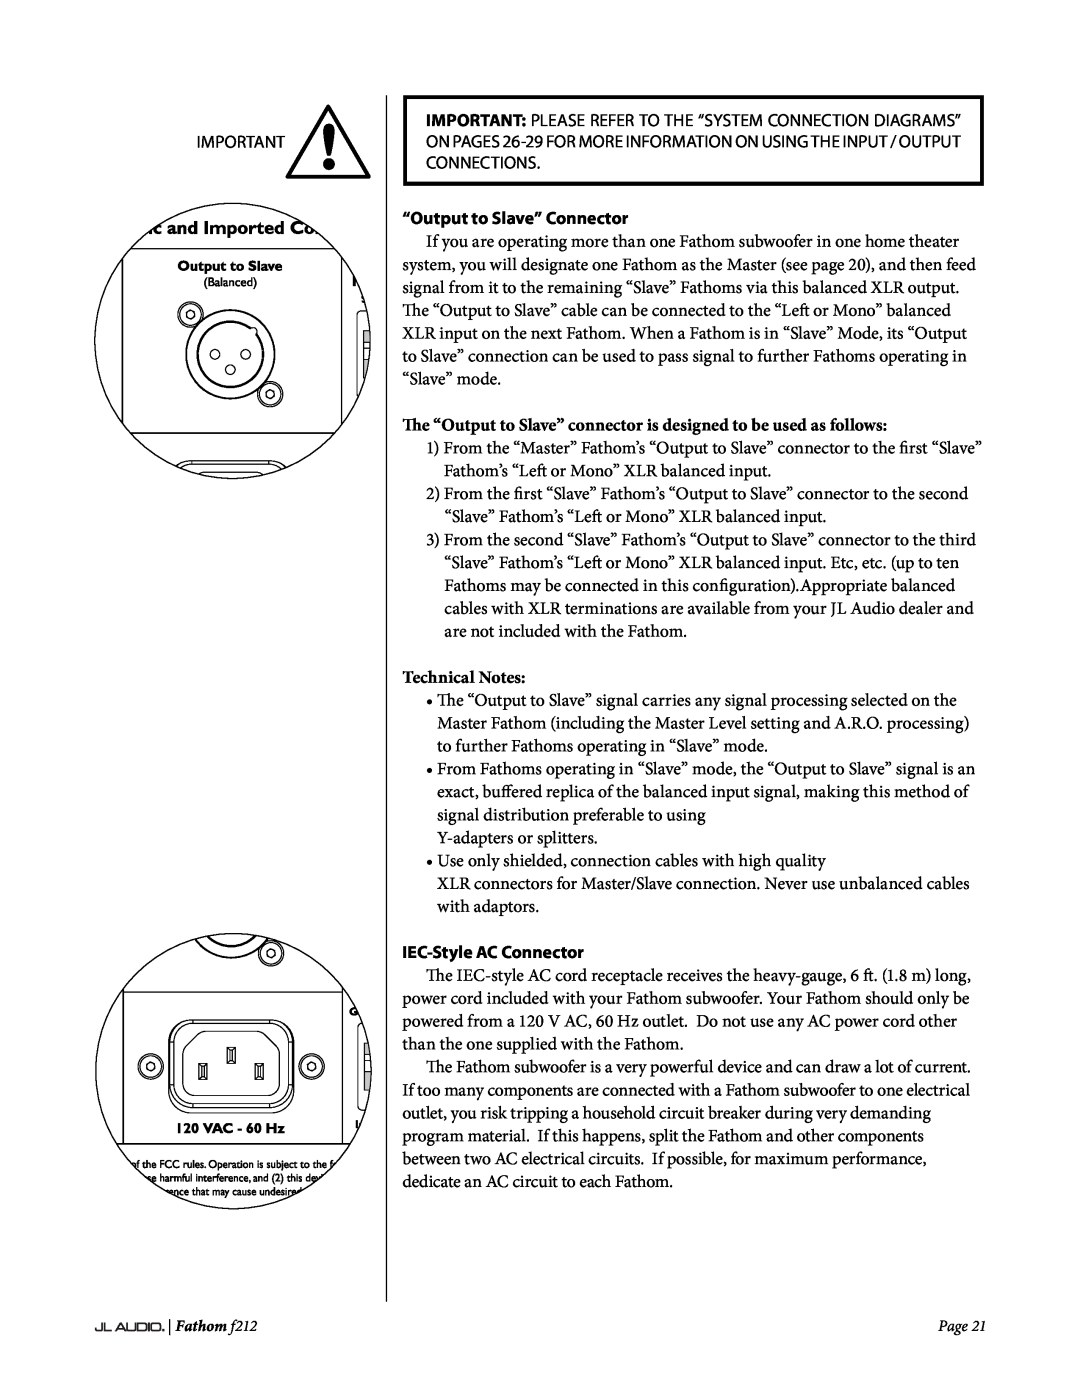 JL Audio f212 owner manual “Output to Slave” Connector, IEC-StyleAC Connector, Technical Notes 